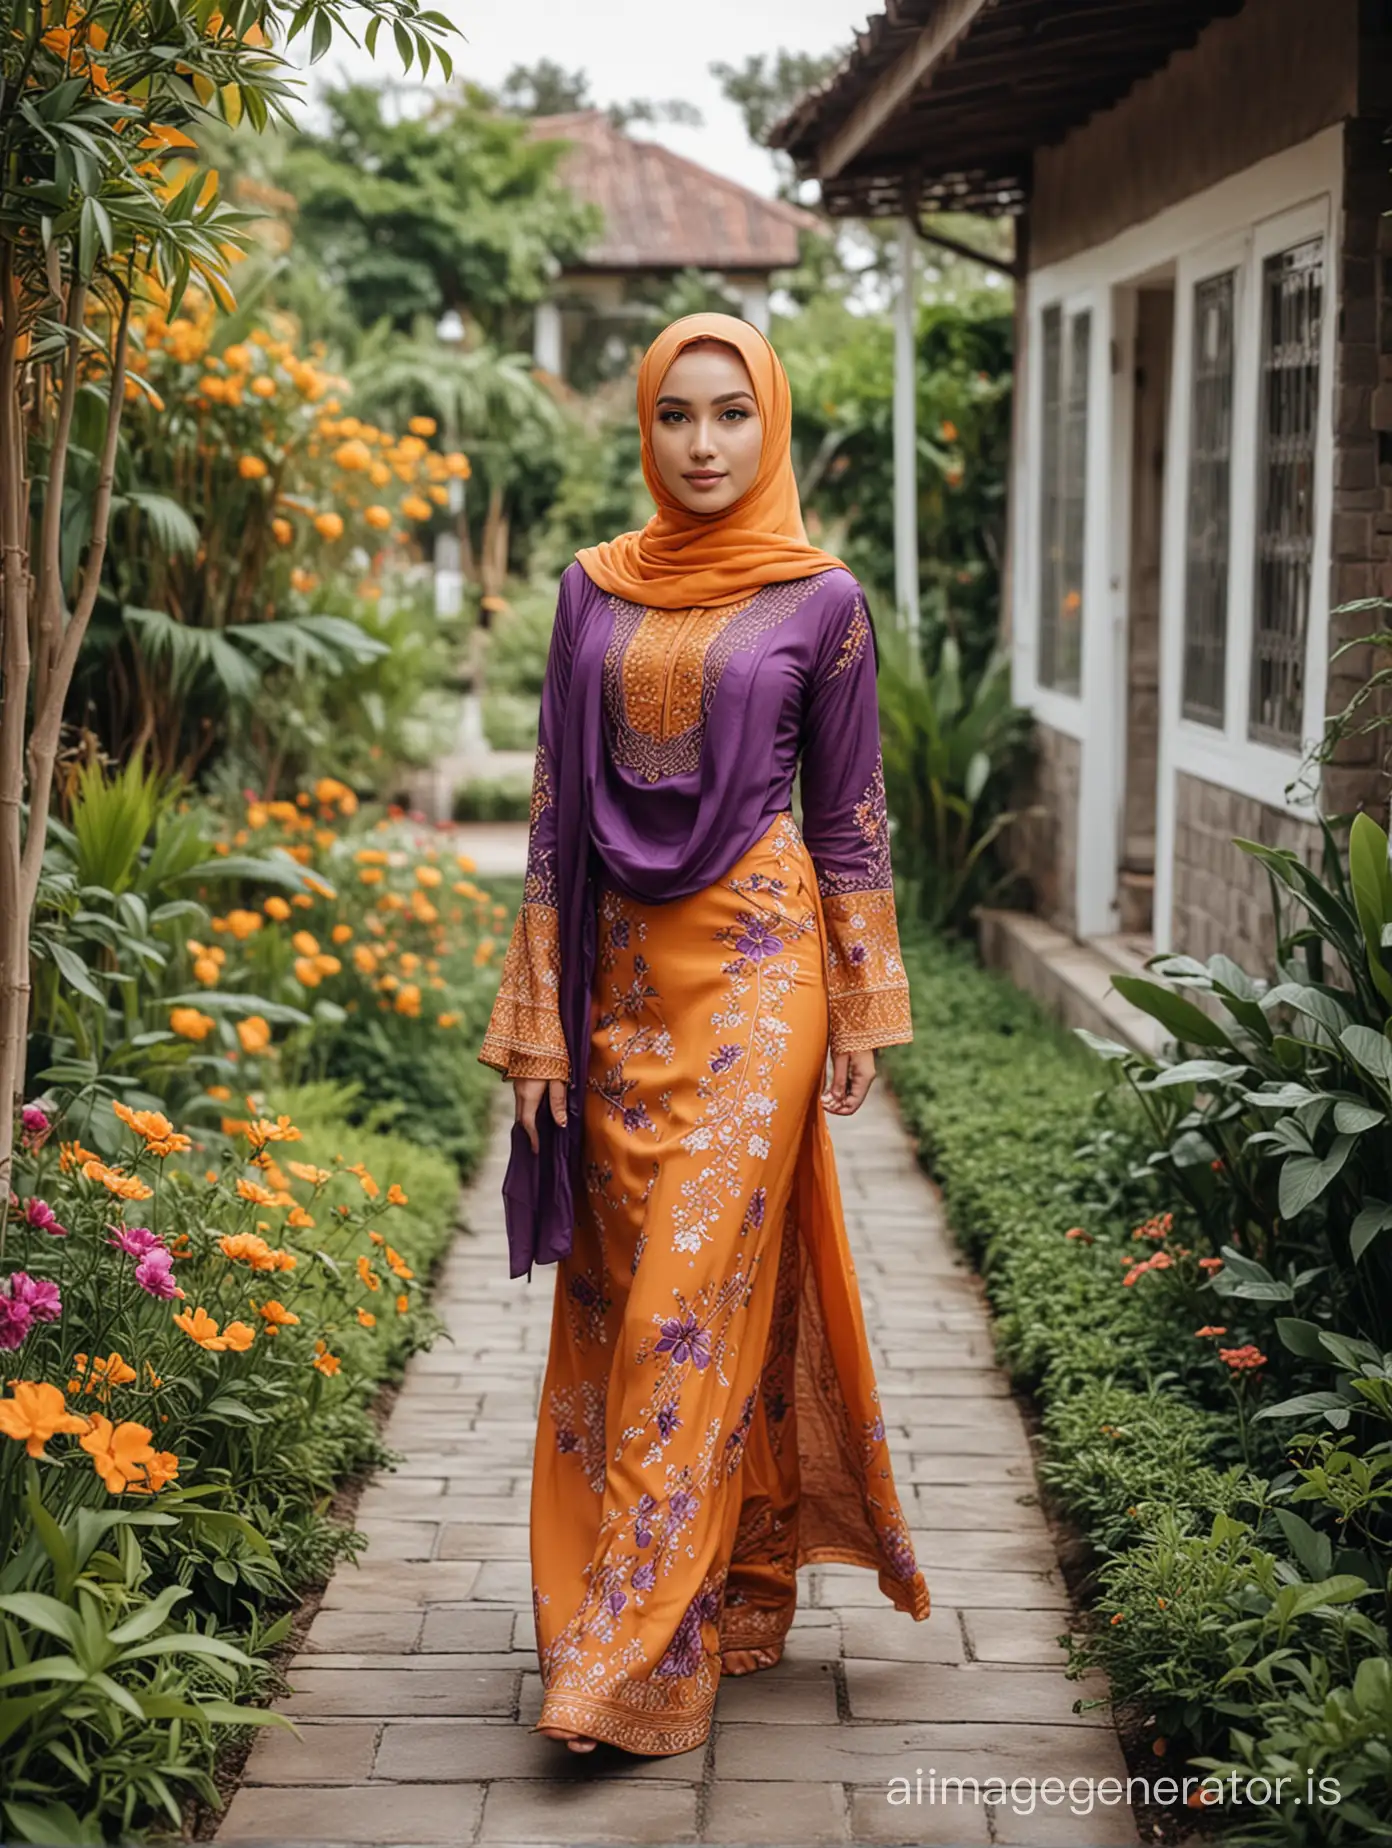 A beautiful girl with a hijab, smooth white skin, orange and purple kebaya walking on the garden of a beautiful house